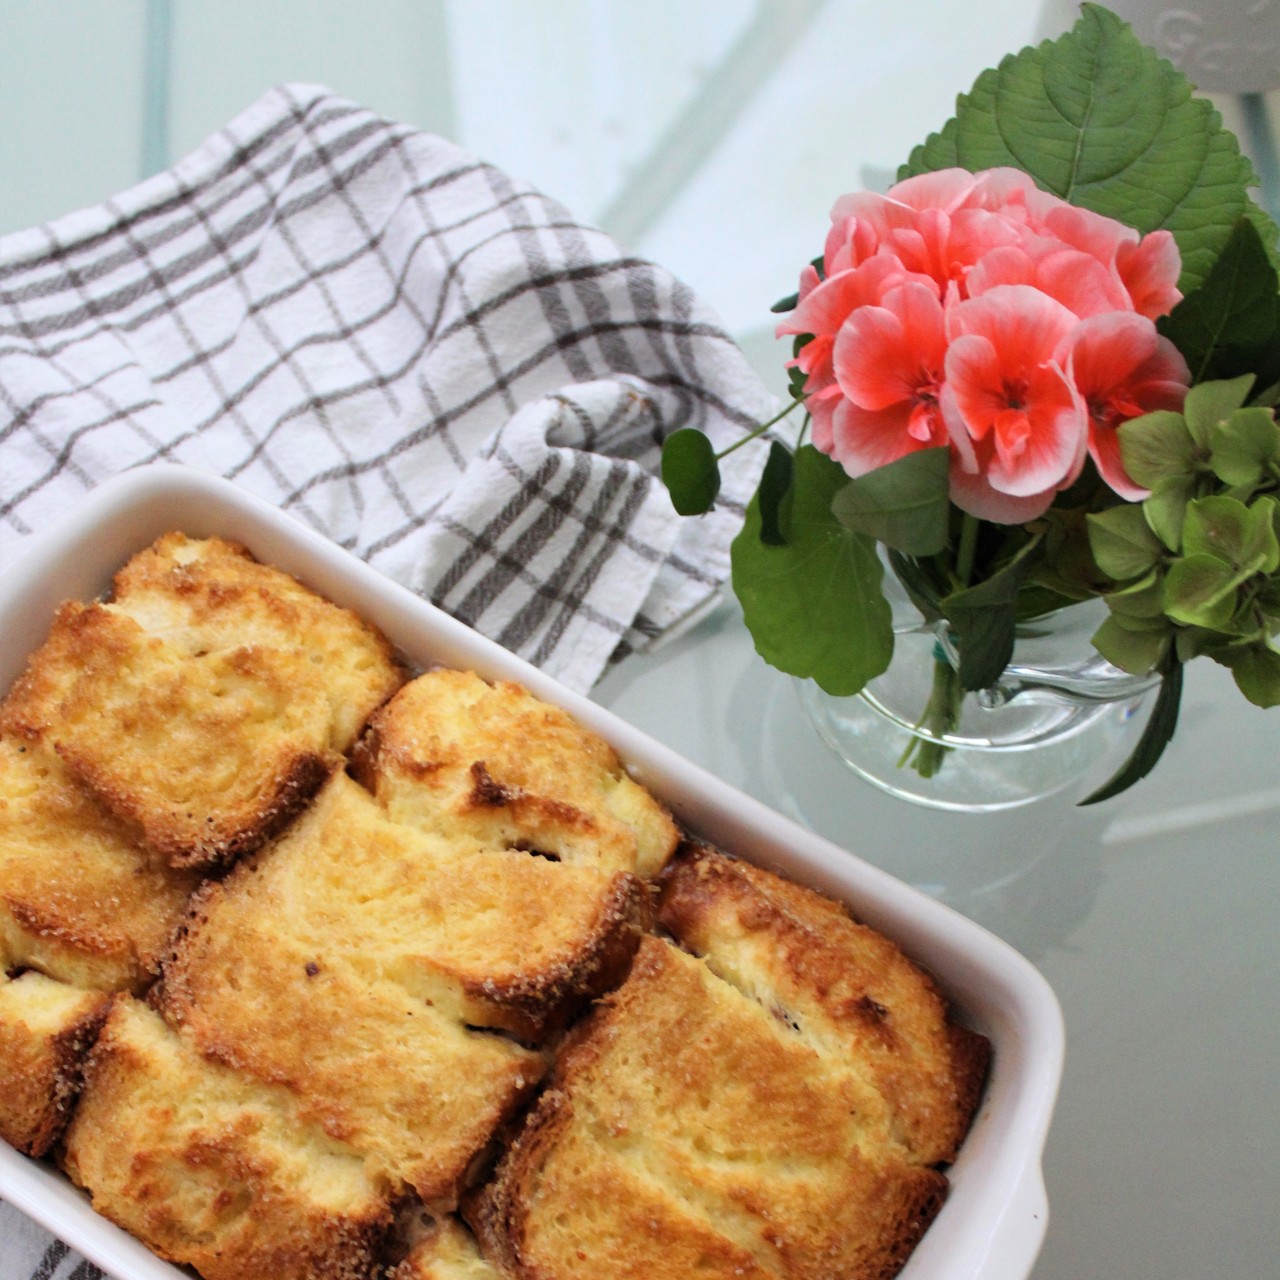 Bread and Butter Pudding is a classic dessert that fits in with zero-waste ideology. Check Tastes of Health to find out how to make it.